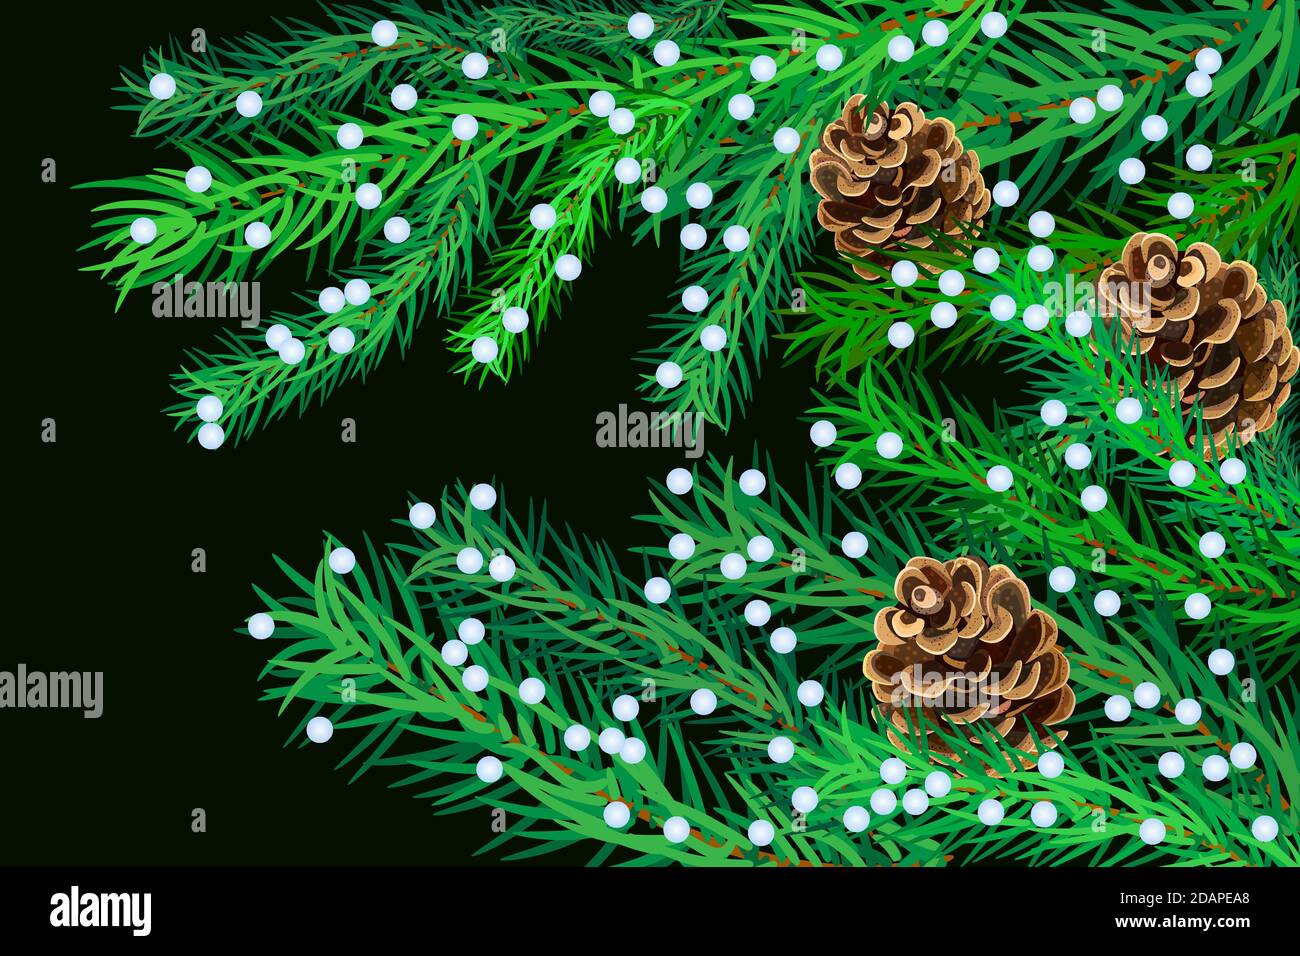 Vector collection of Christmas tree branches with pine cones